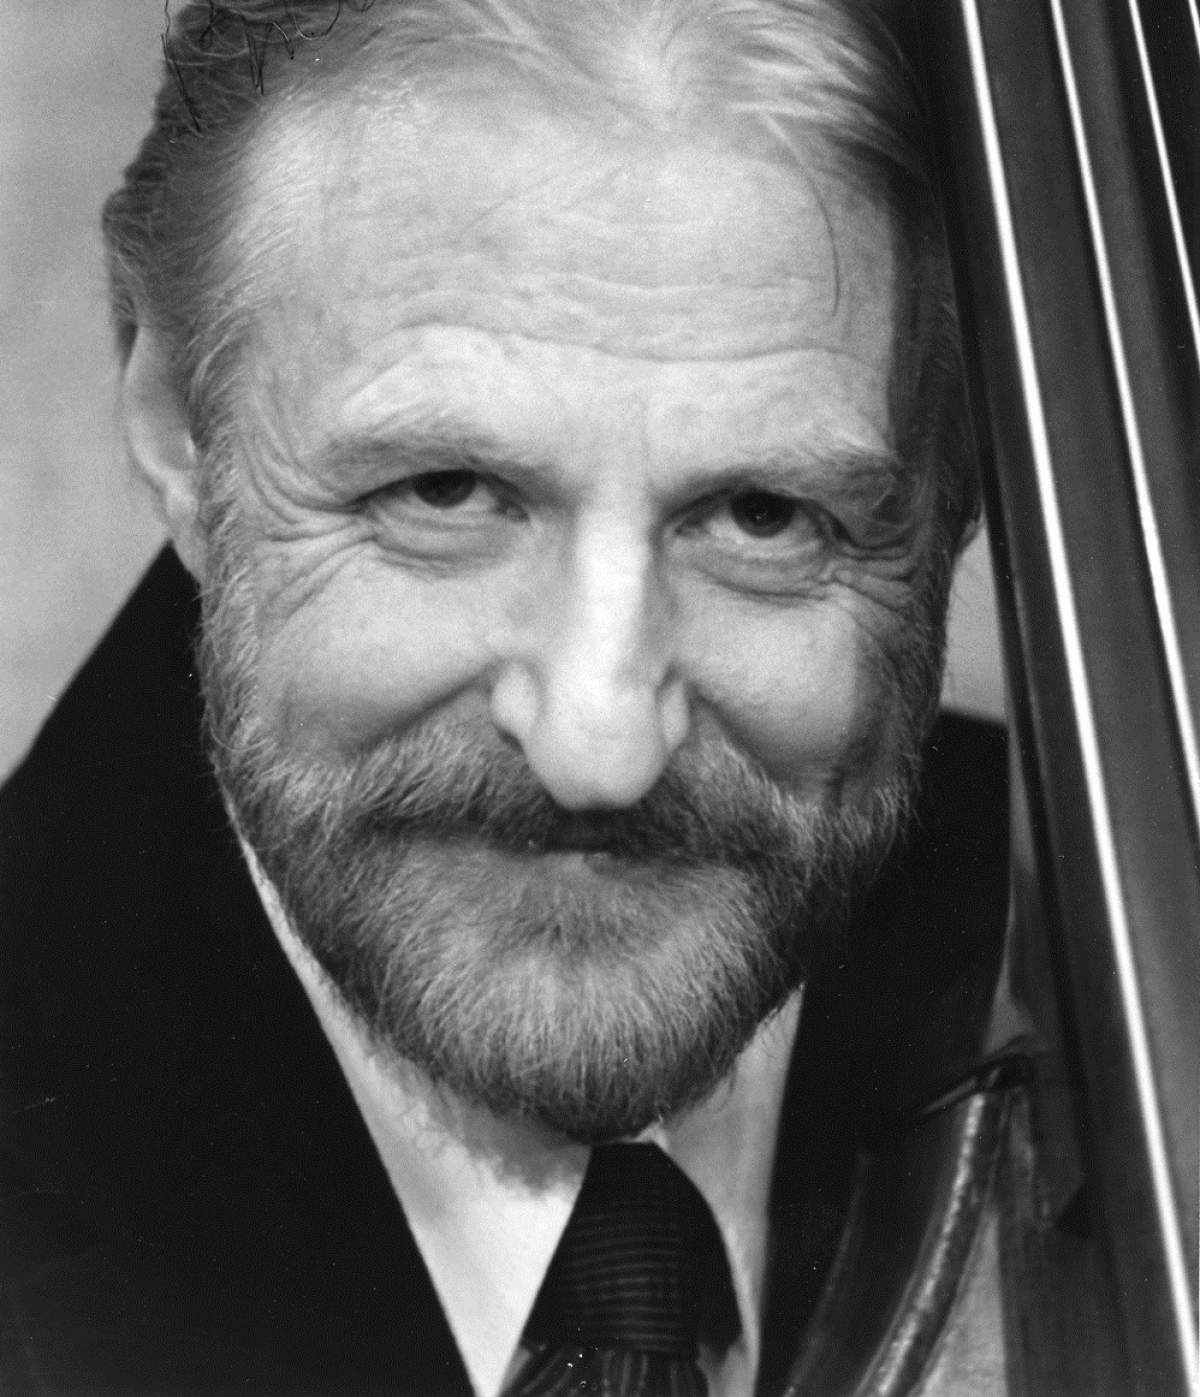 Bruce Bransby, double bass